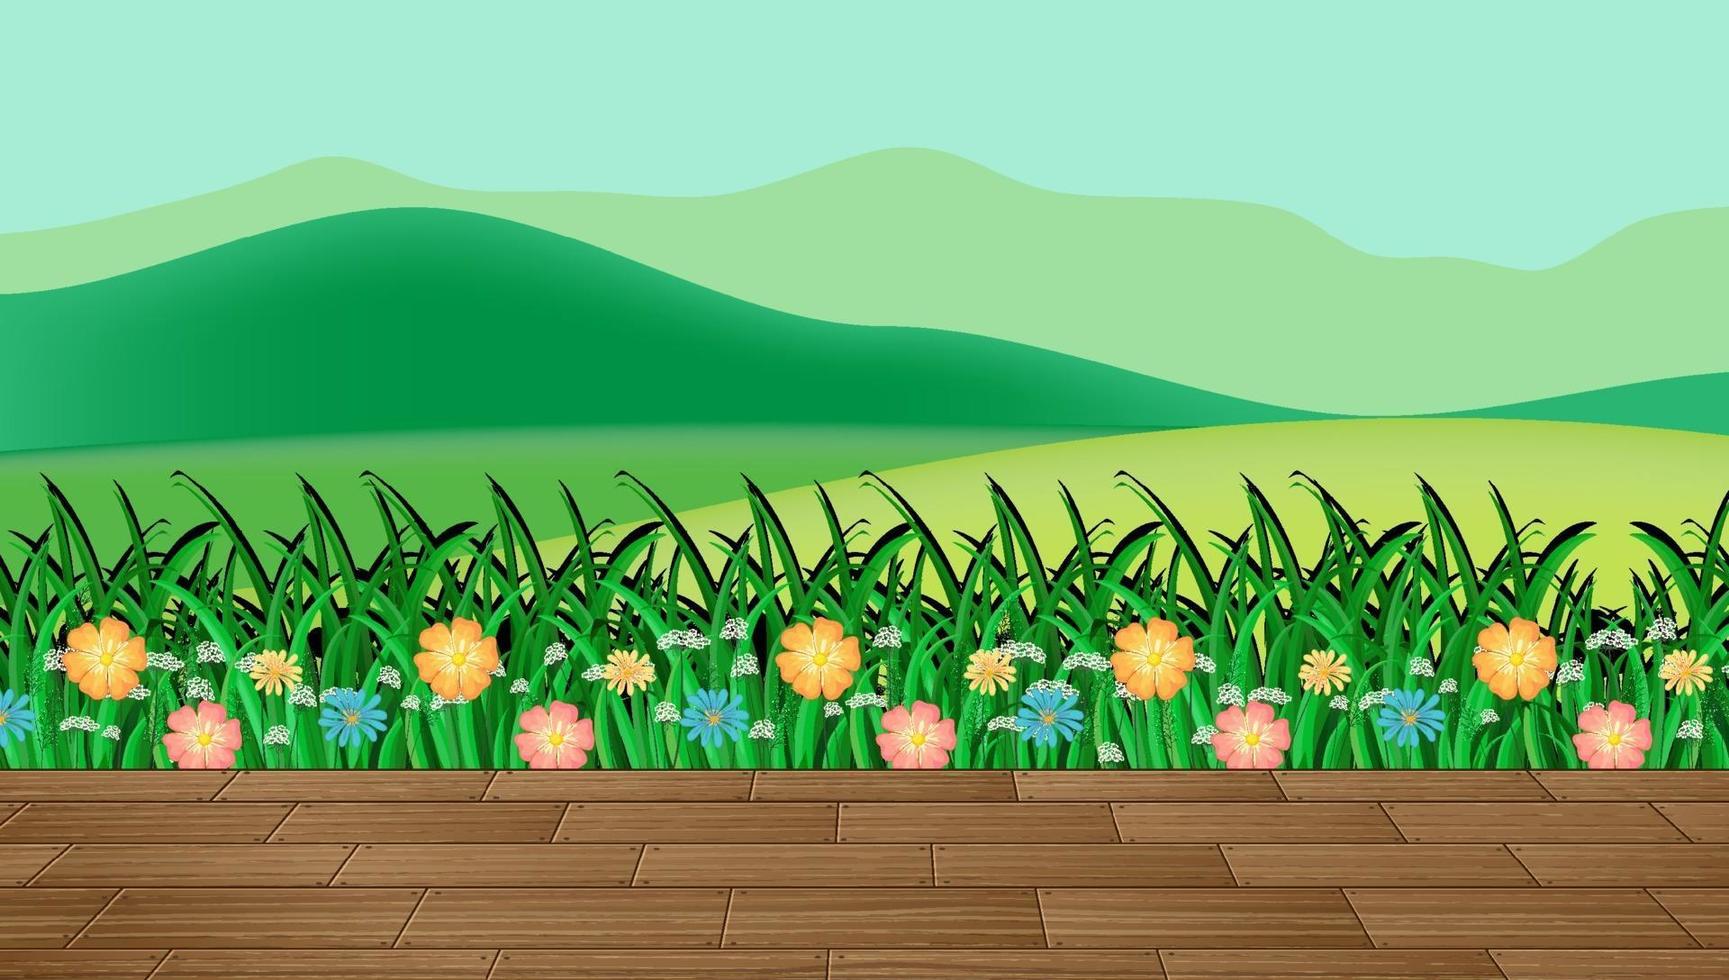 Flower field and green grass with mountain backdrop vector